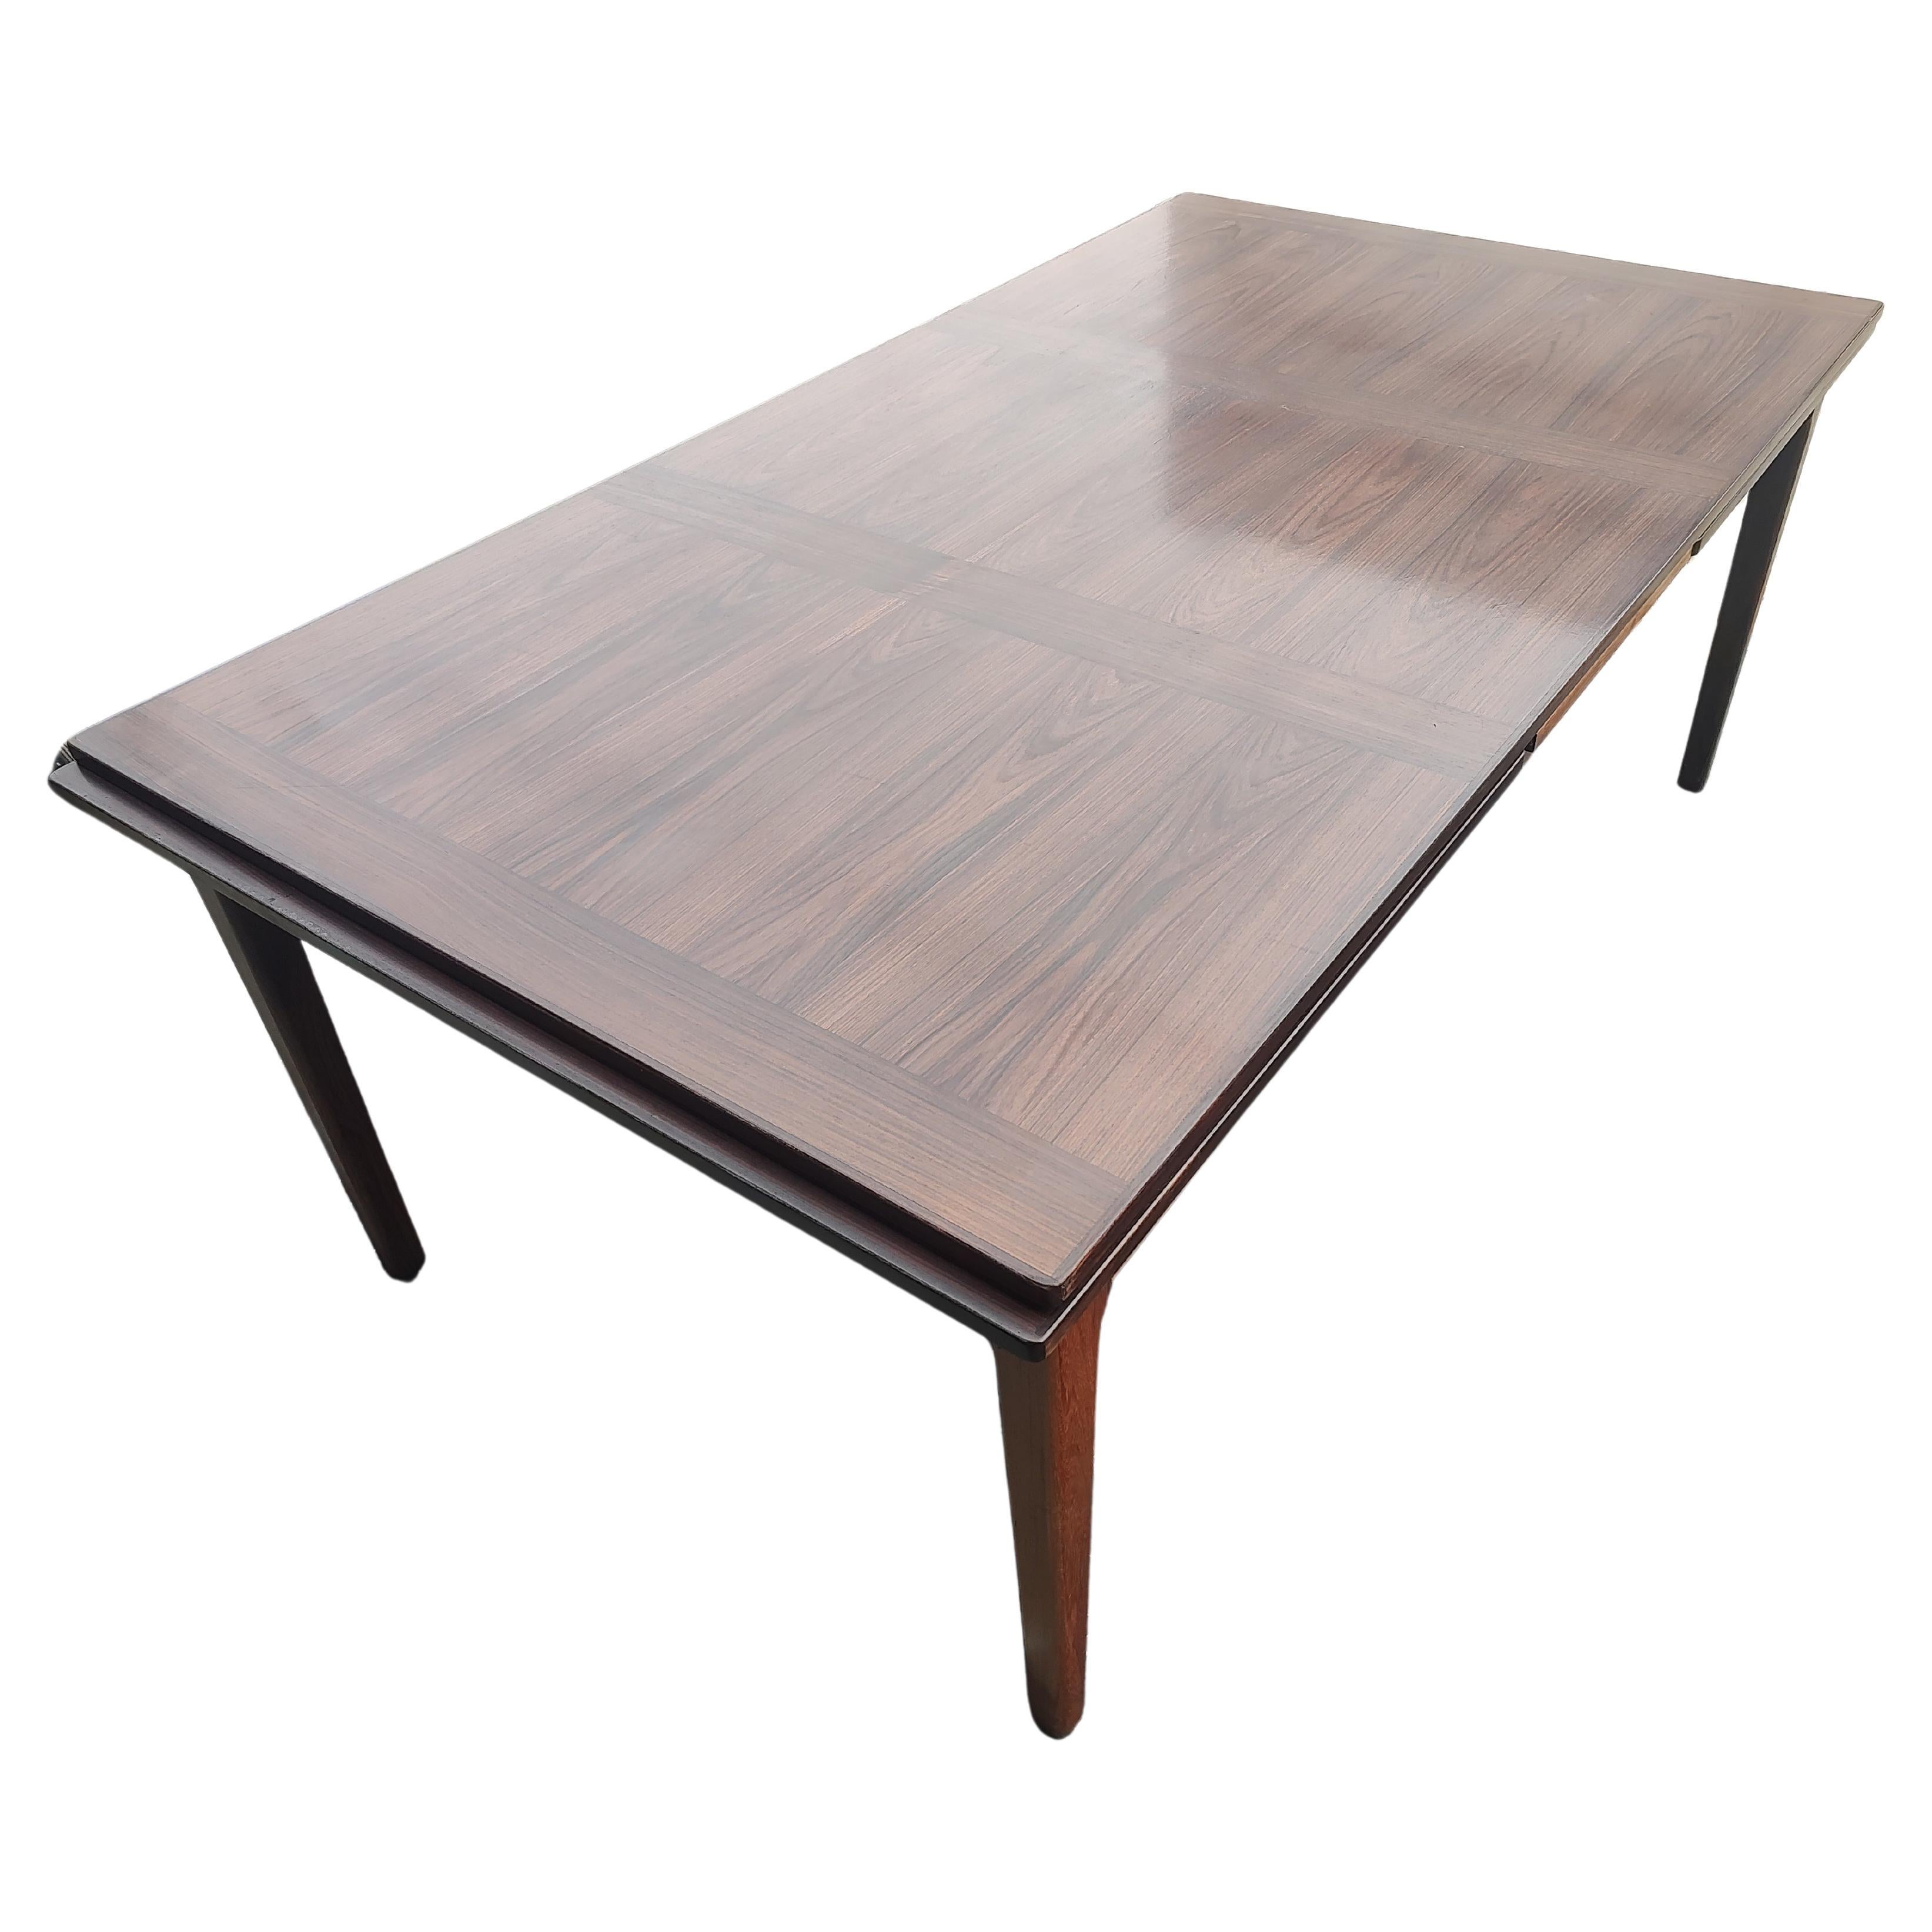 Mid Century Modern Danish Rosewood Dining Room Table with 2 Extension Leaves In Good Condition For Sale In Port Jervis, NY